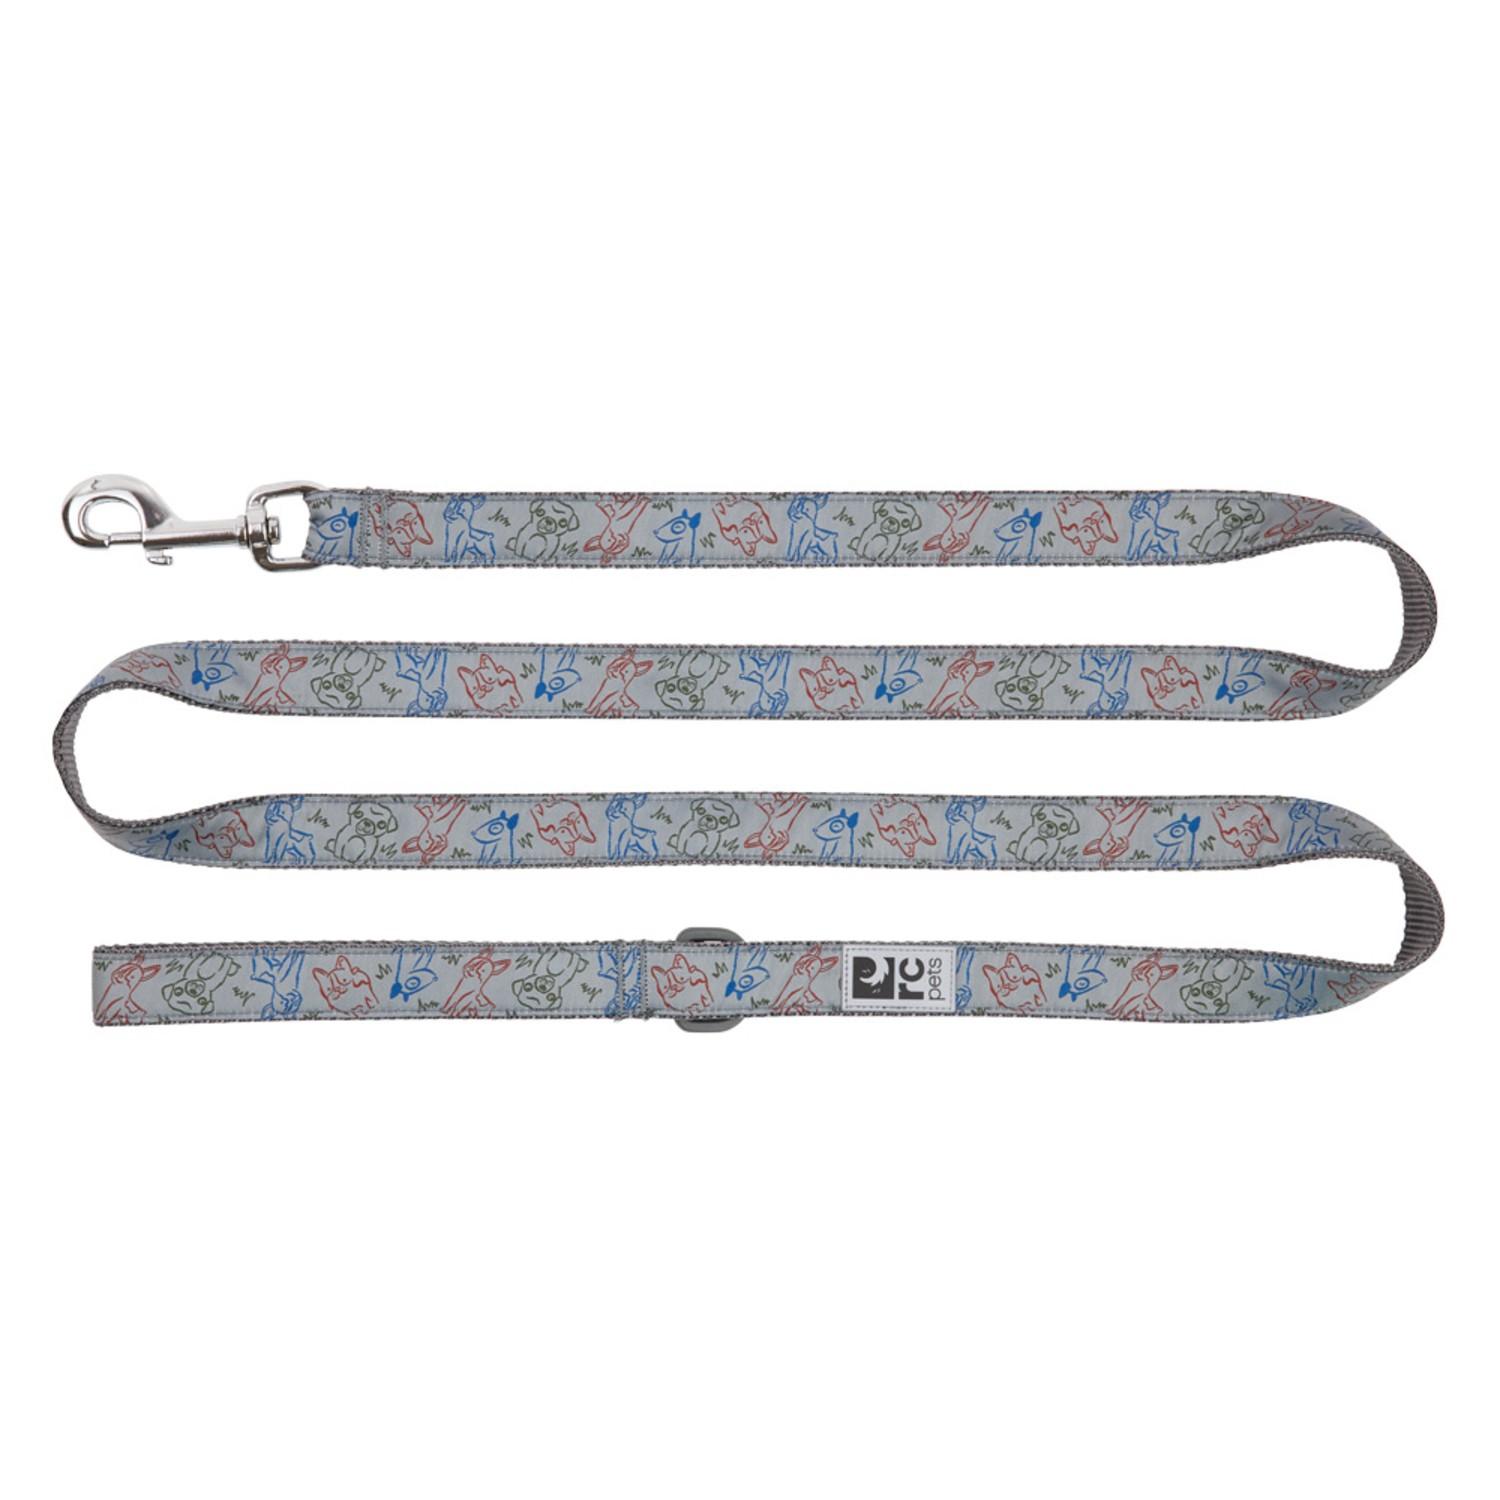 Doodle Dogs Dog Leash by RC Pets